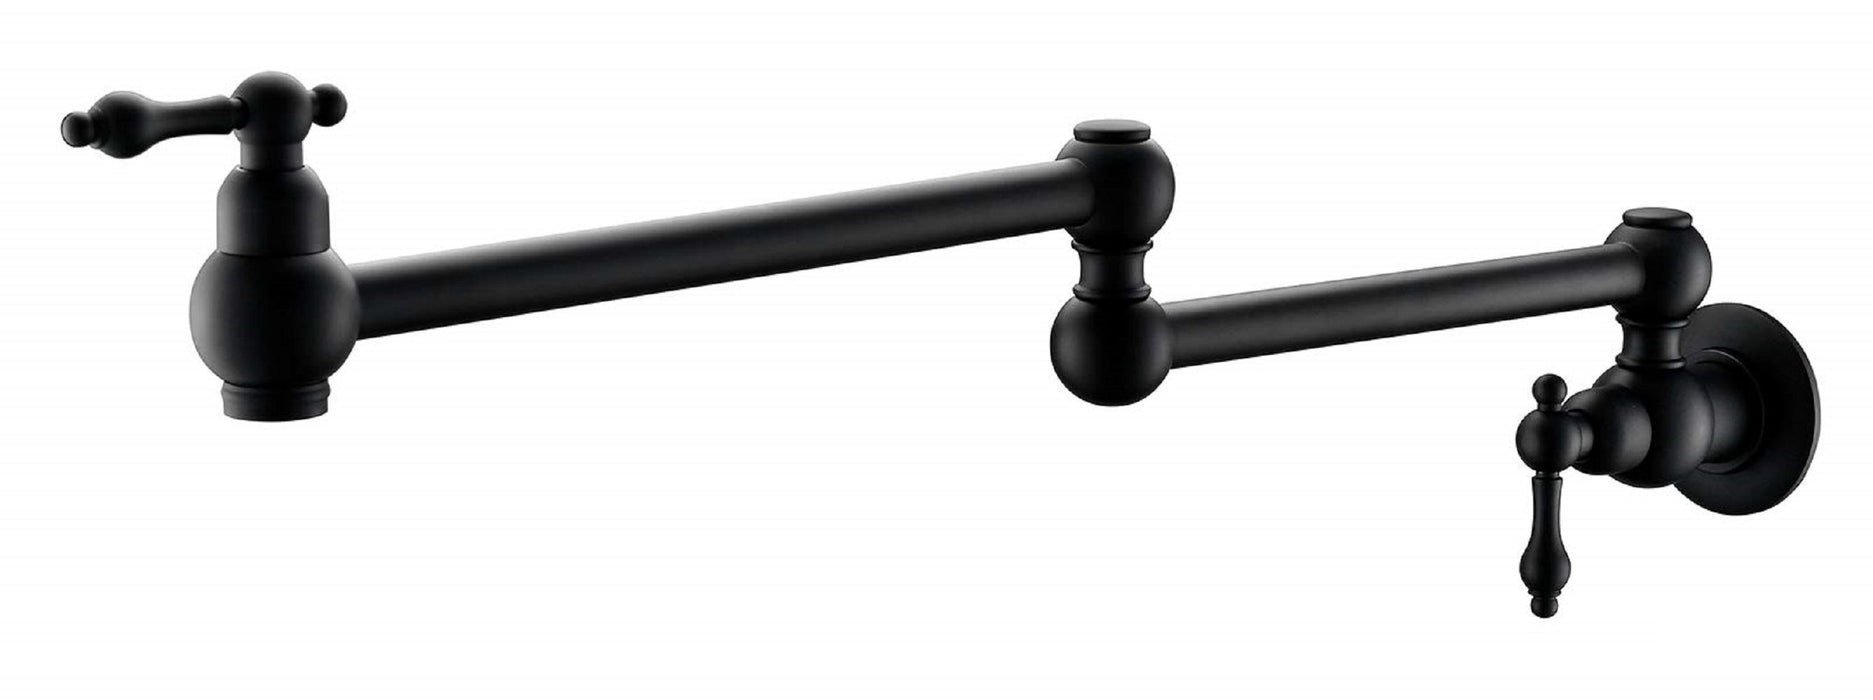 Pot Filler Faucet Wall Mount, With Double Joint Swing Arms Matte Black